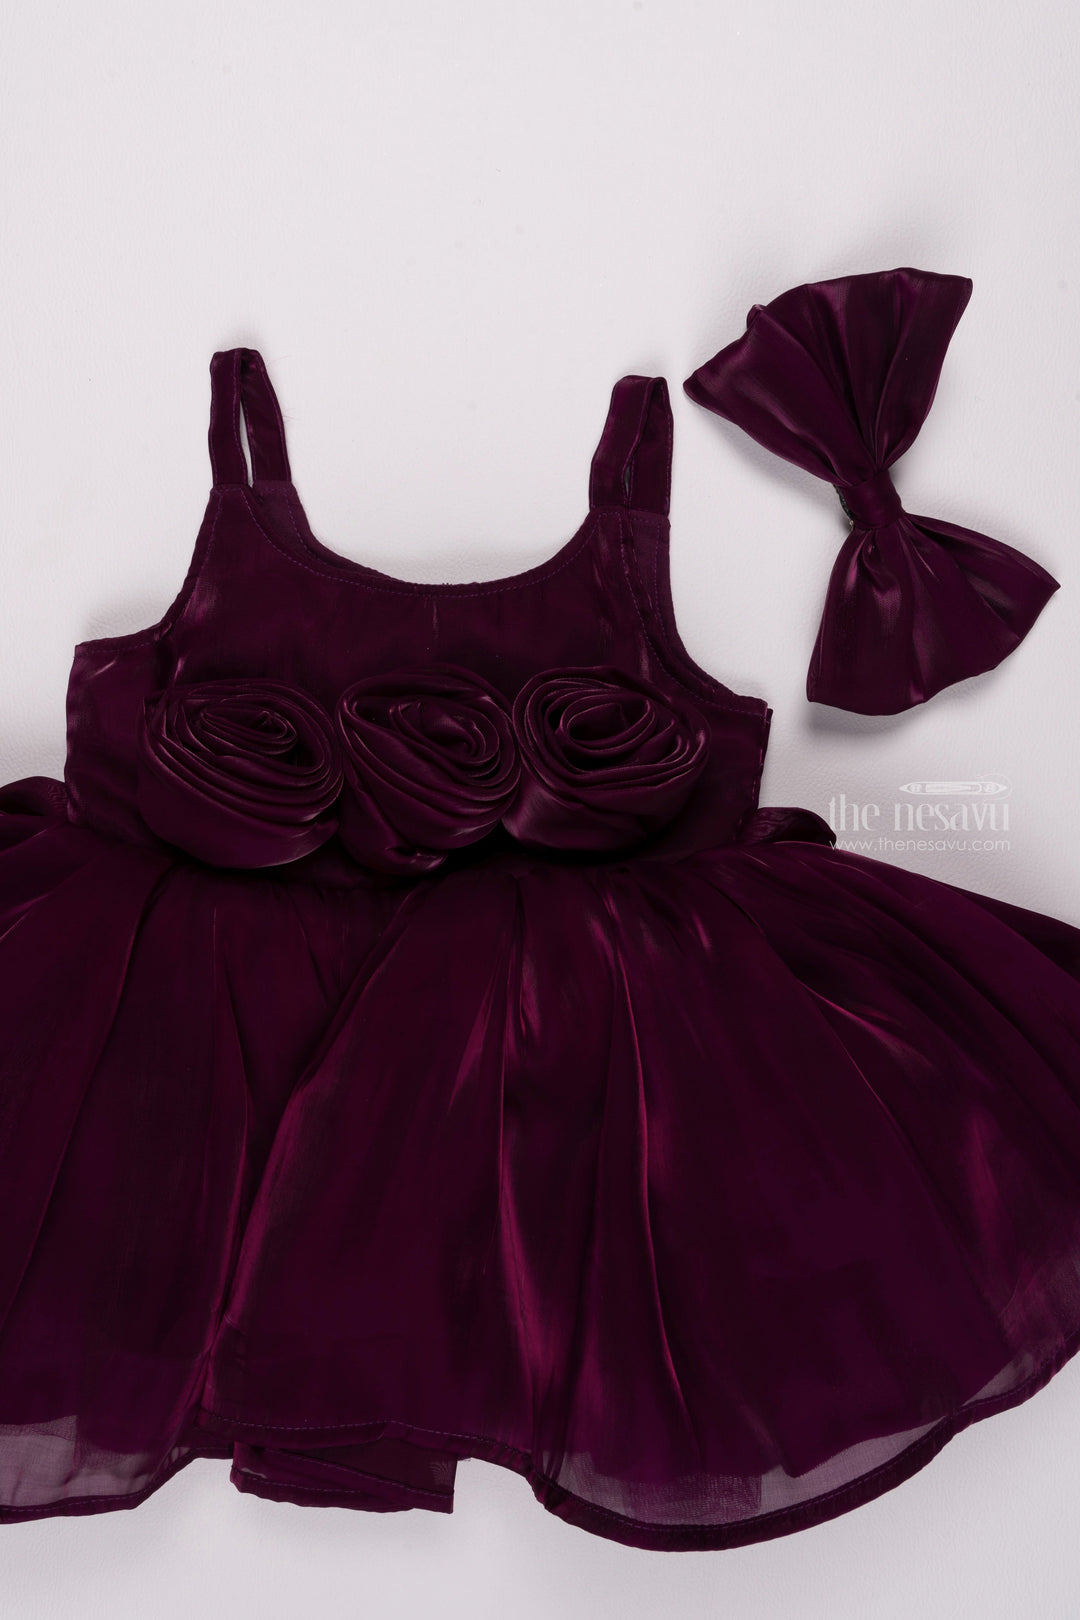 The Nesavu Girls Fancy Party Frock Purple Passion: Stunning Fabric Floral Applique on Organza for a Gorgeous Party Look Nesavu Premium Organza Purple Baby Dresses | Fancy Dresses for Little Girls | The Nesavu